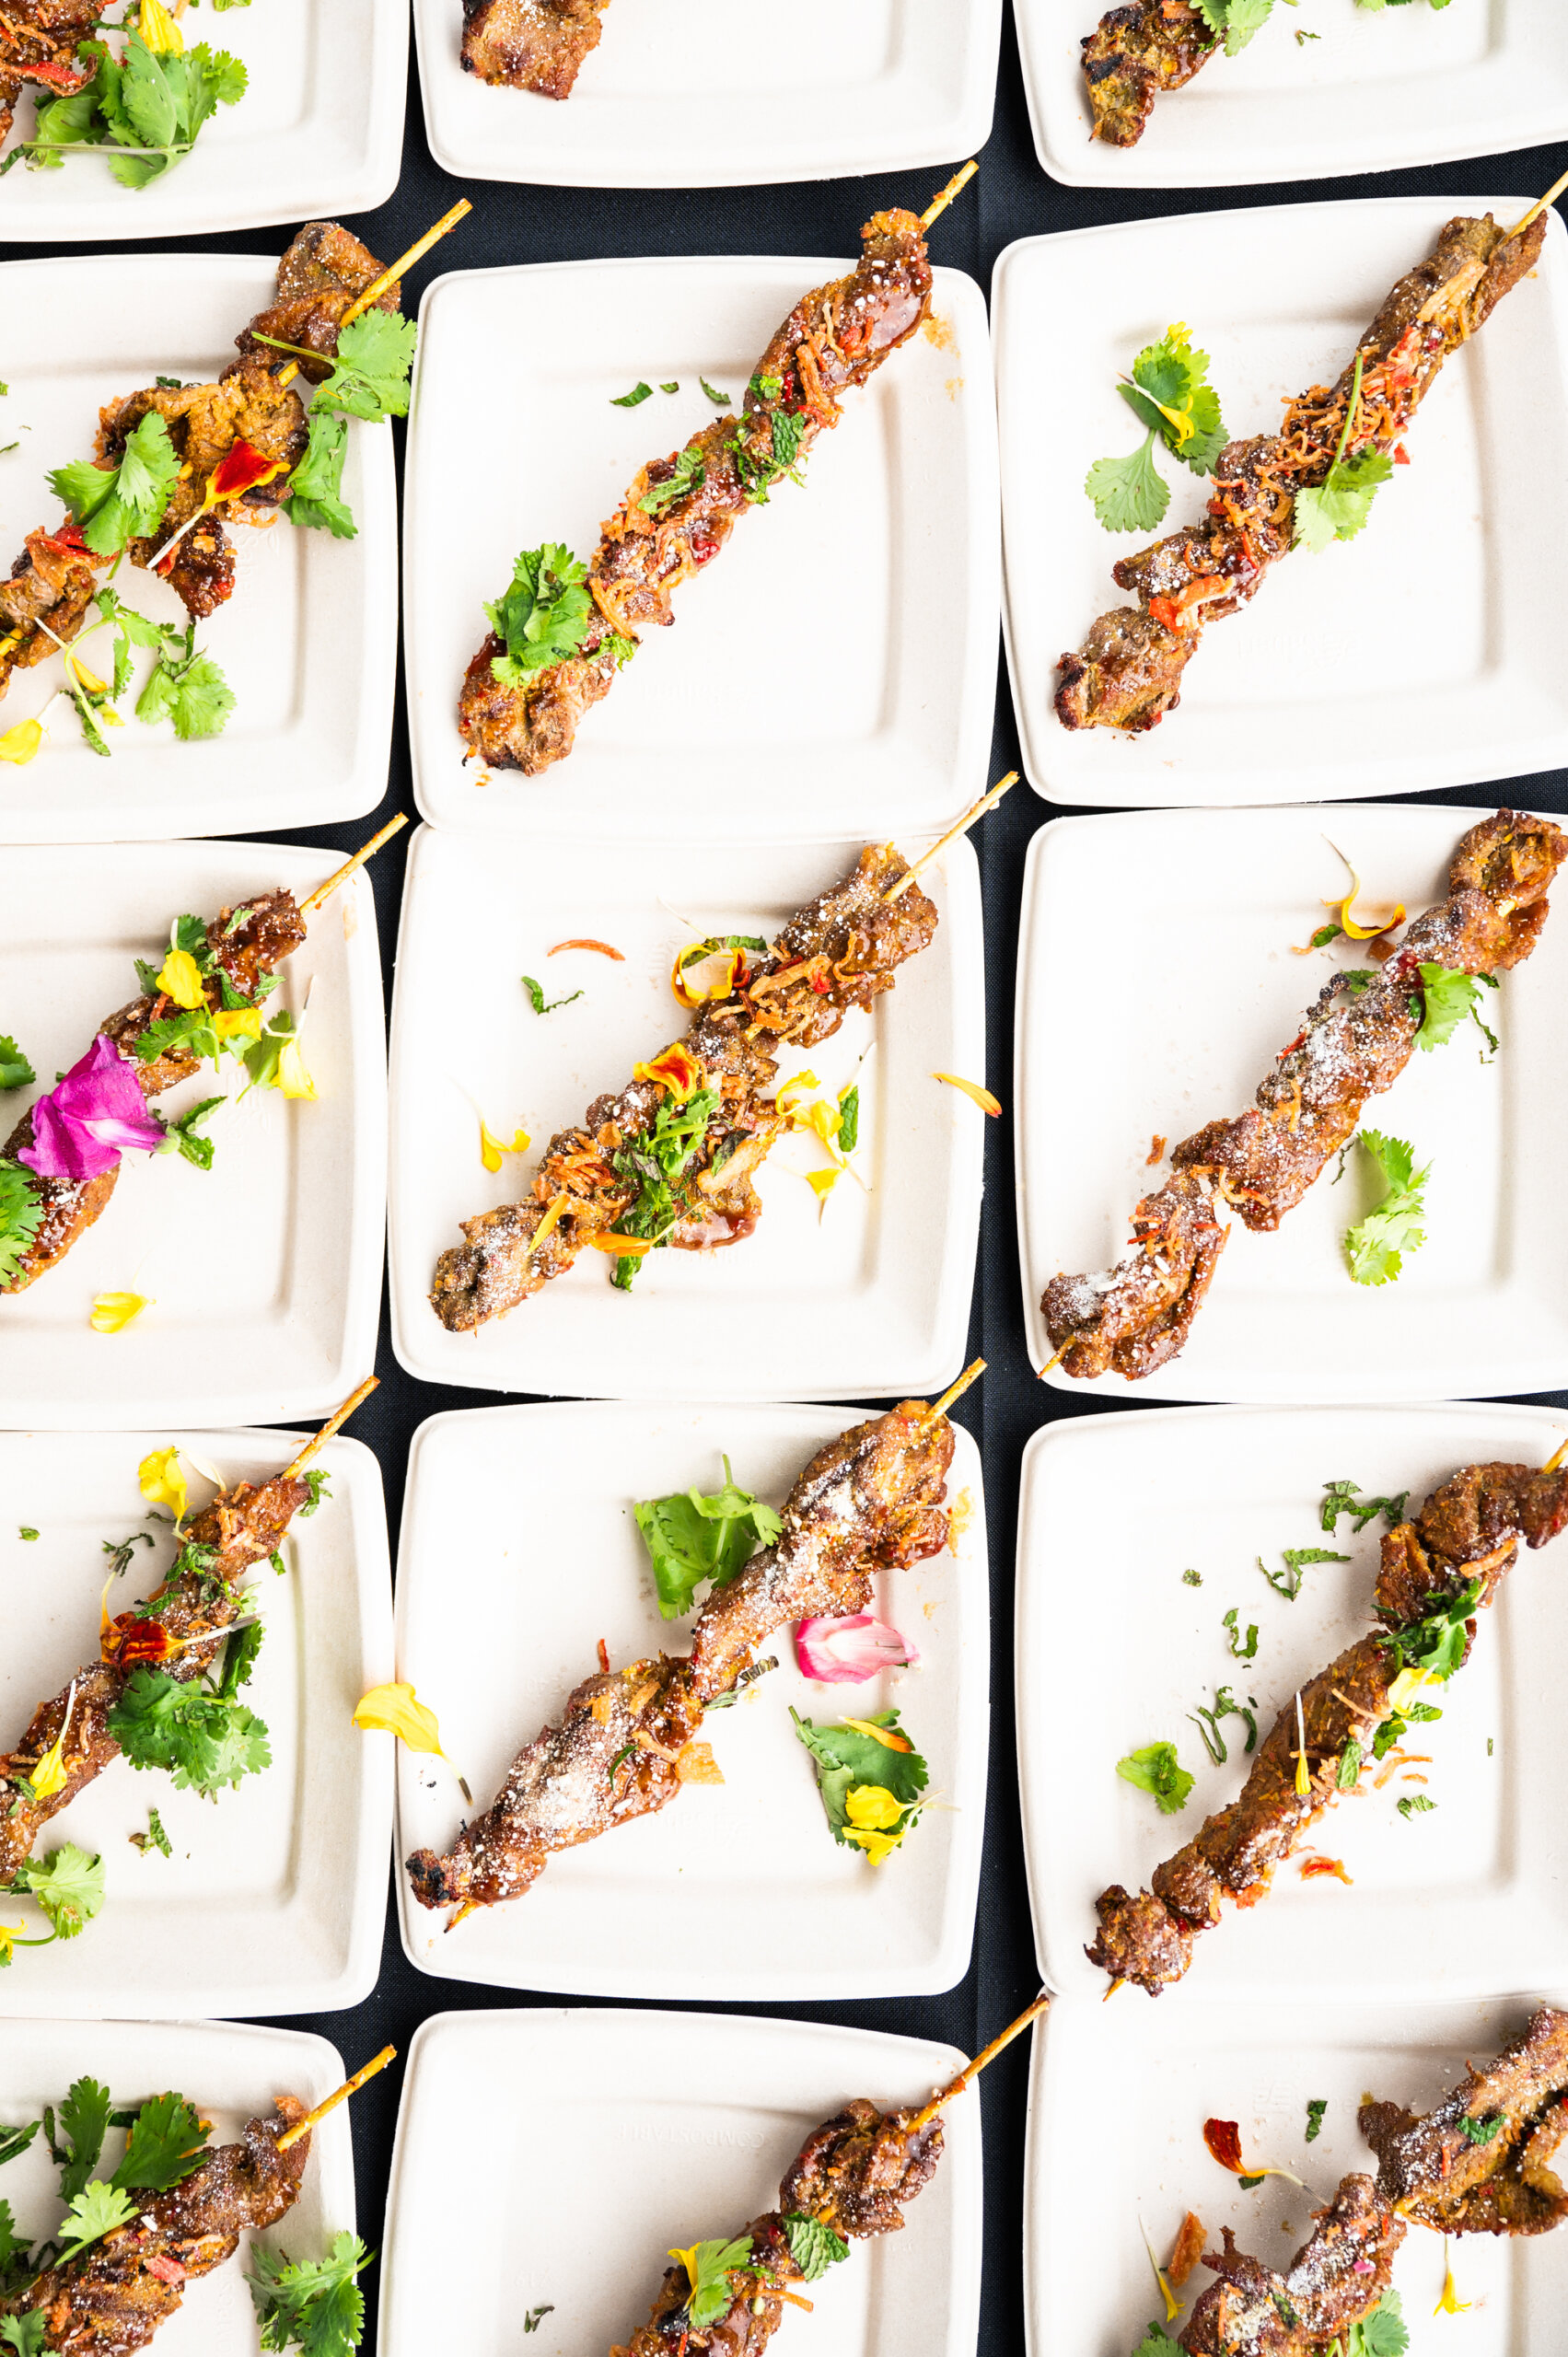 Cambodian beef skewers by Chef Sophina Uong at Hot Luck Fest